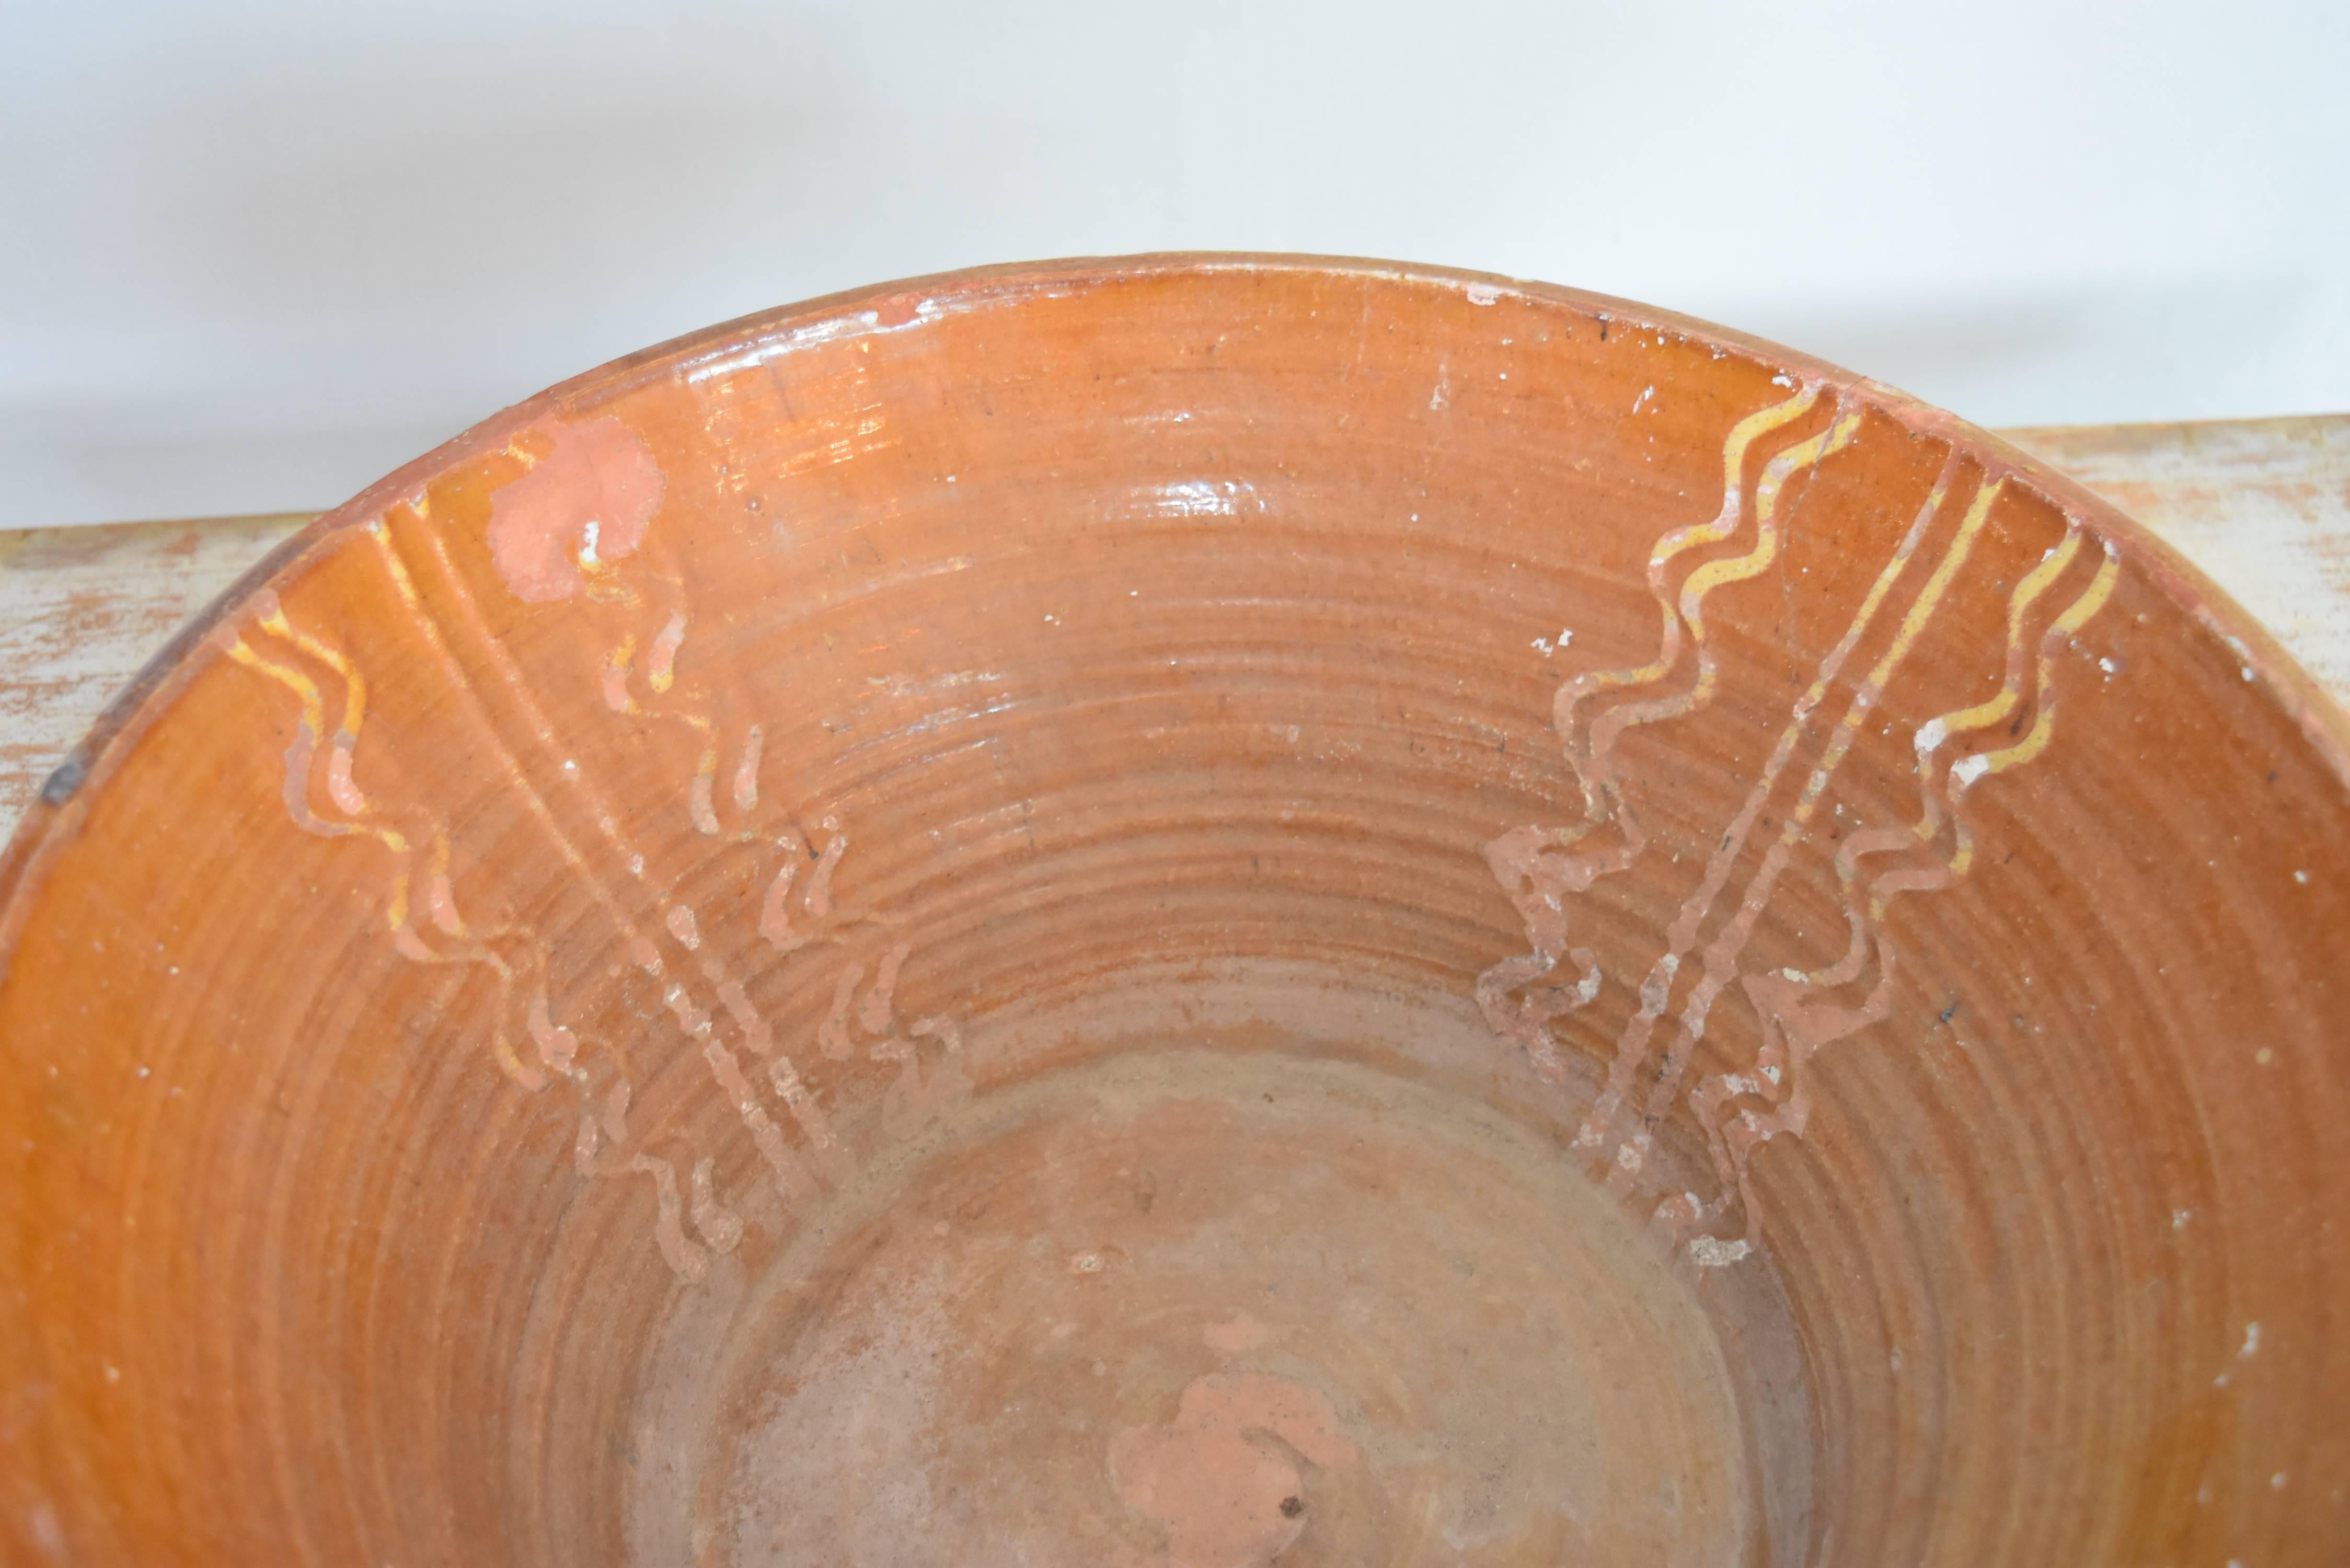 These bowls were used both as decor and in the kitchen. This one has a handsome patina with glazed earthy orange and squiggles of lemon glaze in the design. It comes from the Tarragona area of Spain.